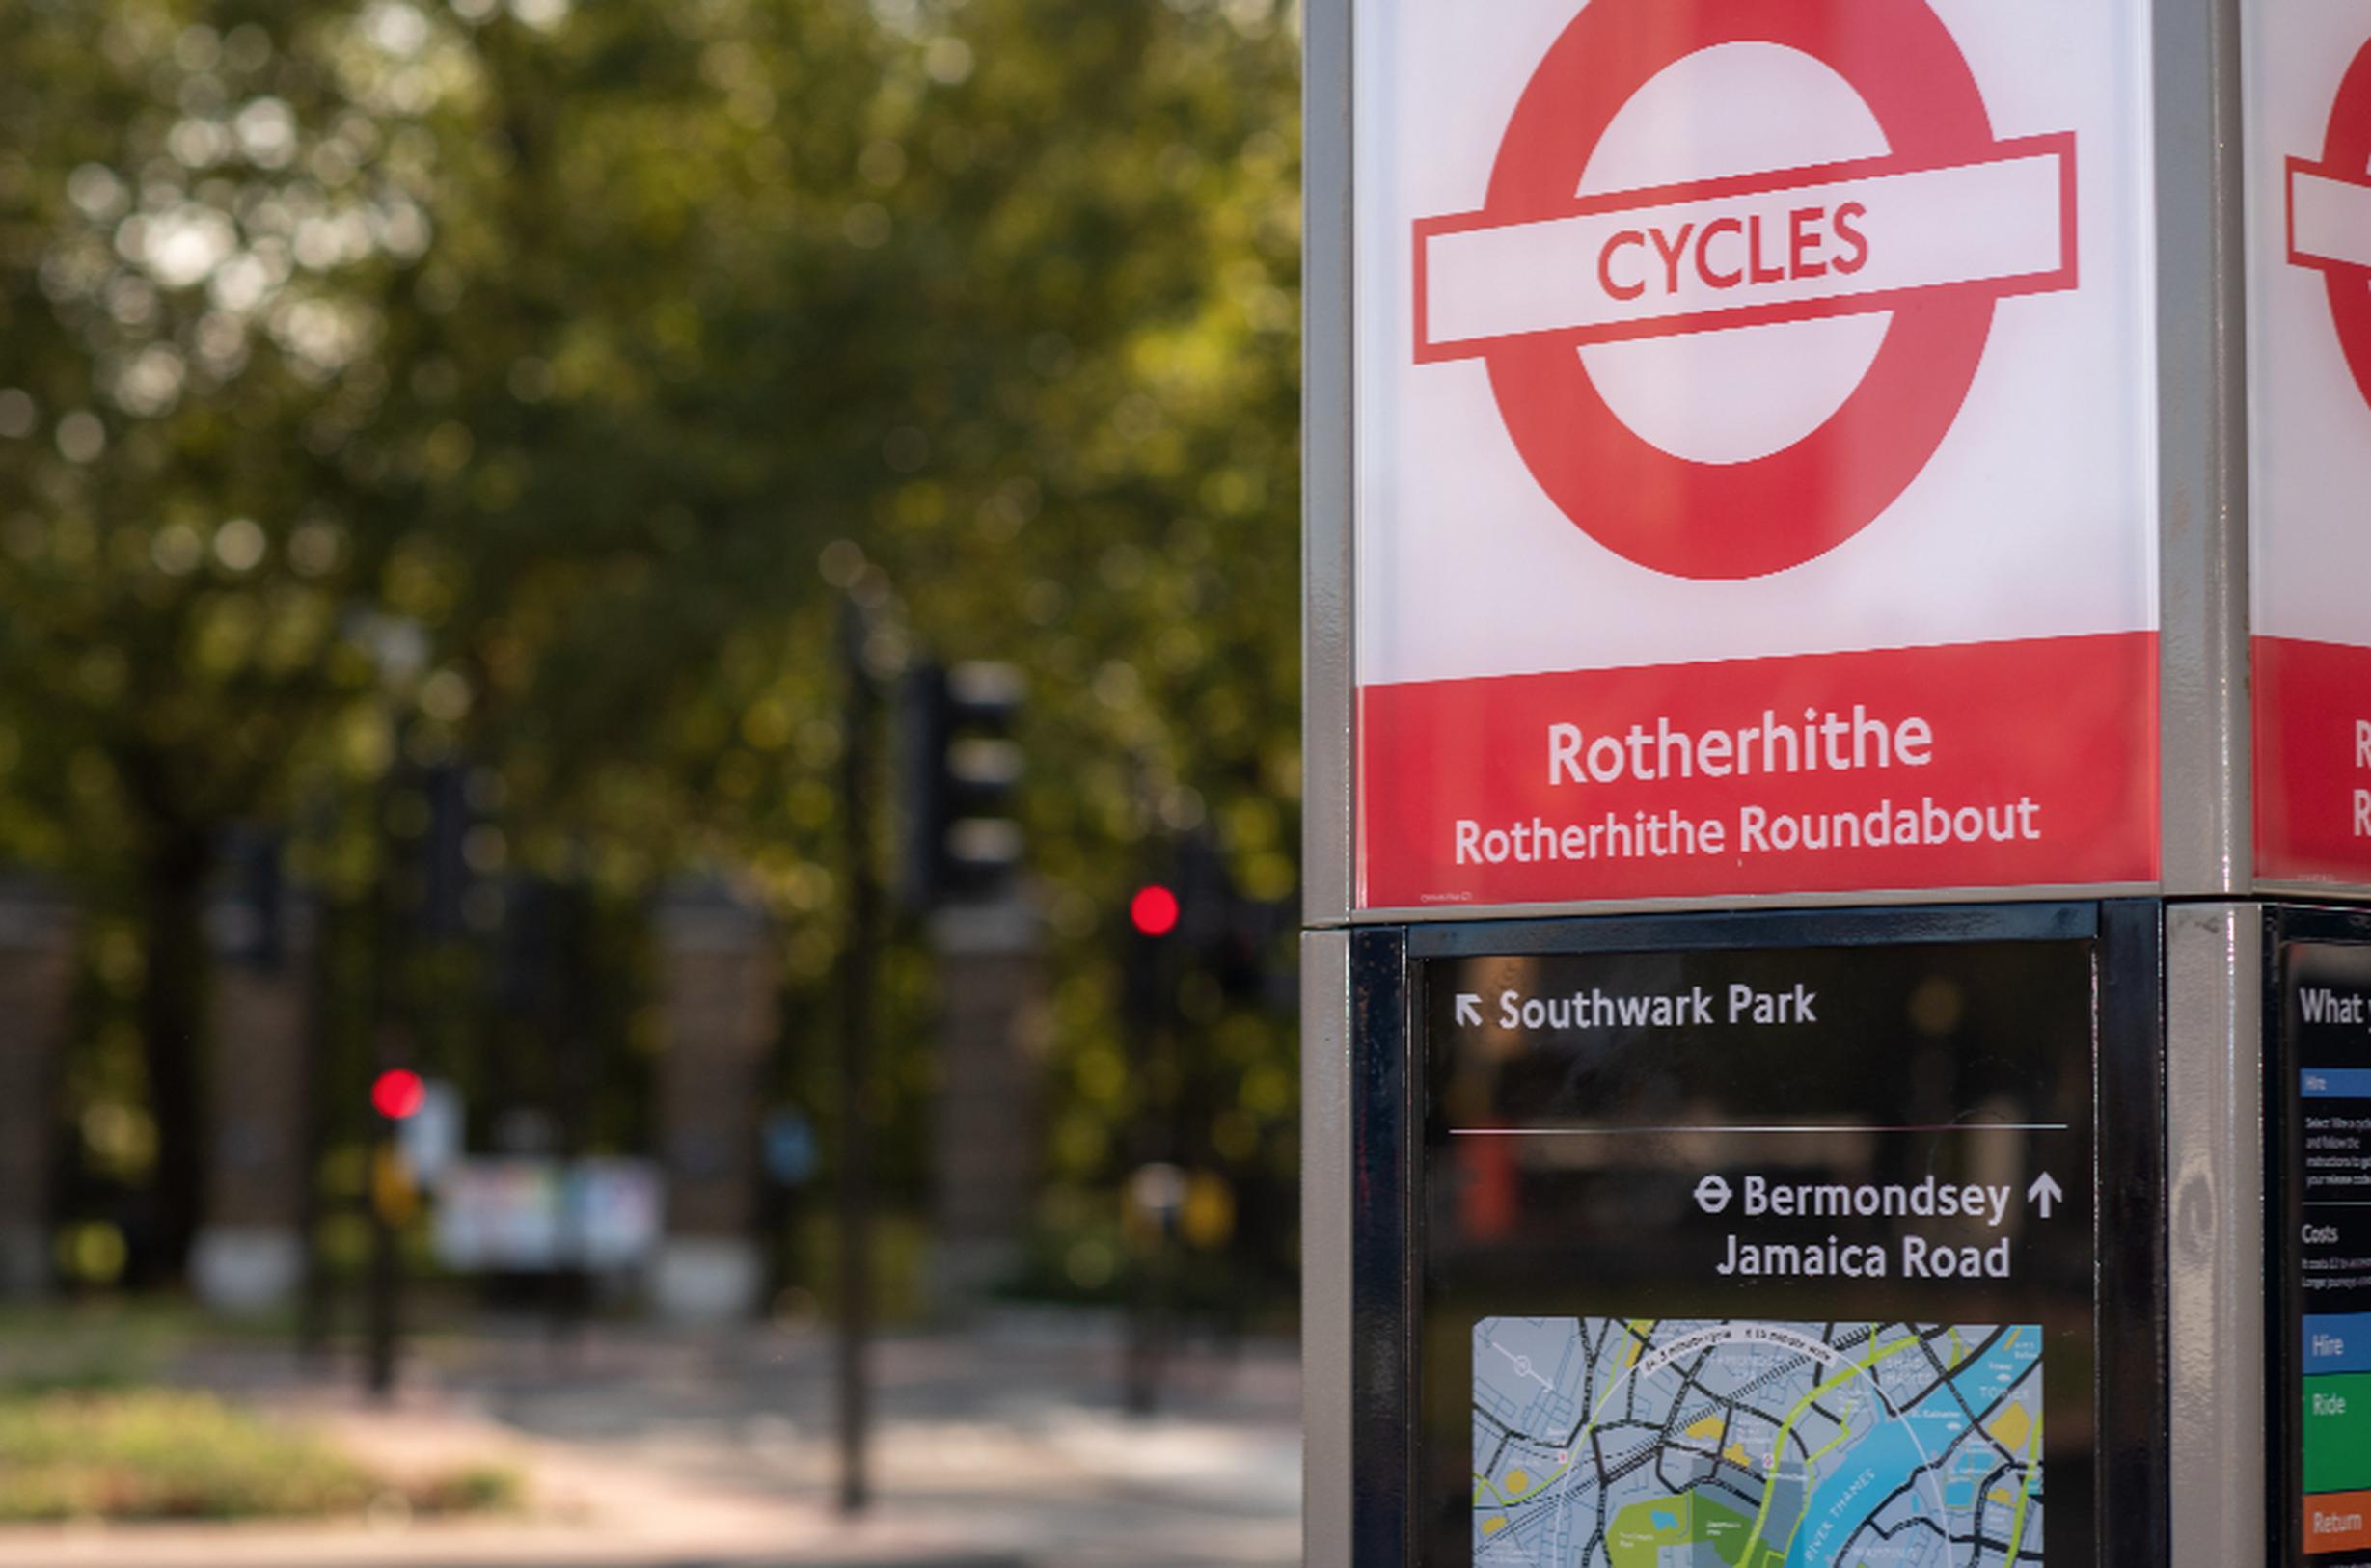 As part of the work, Rotherhithe roundabout was overhauled